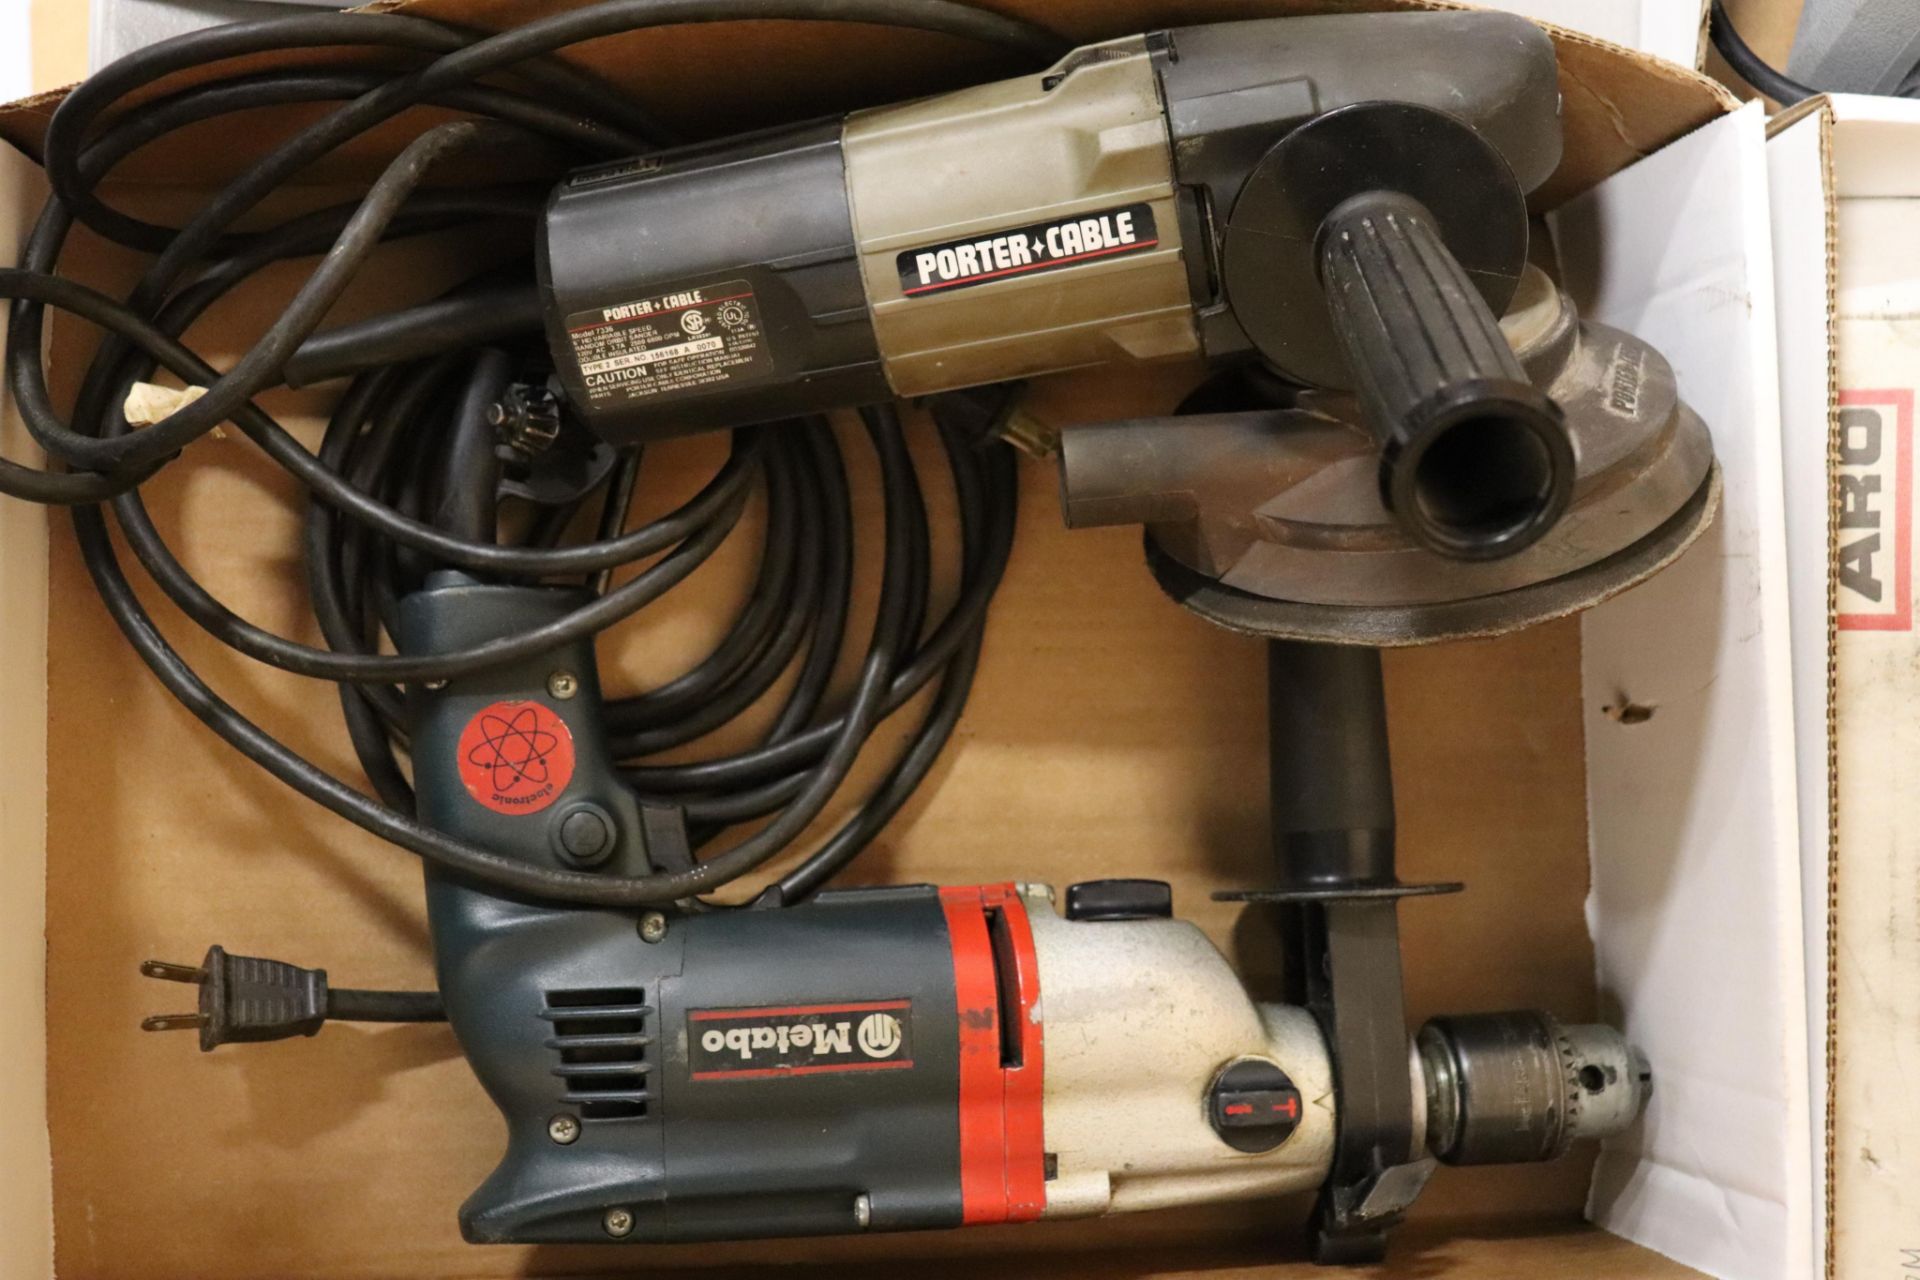 Metabo drill & porter cable sander - Image 2 of 2